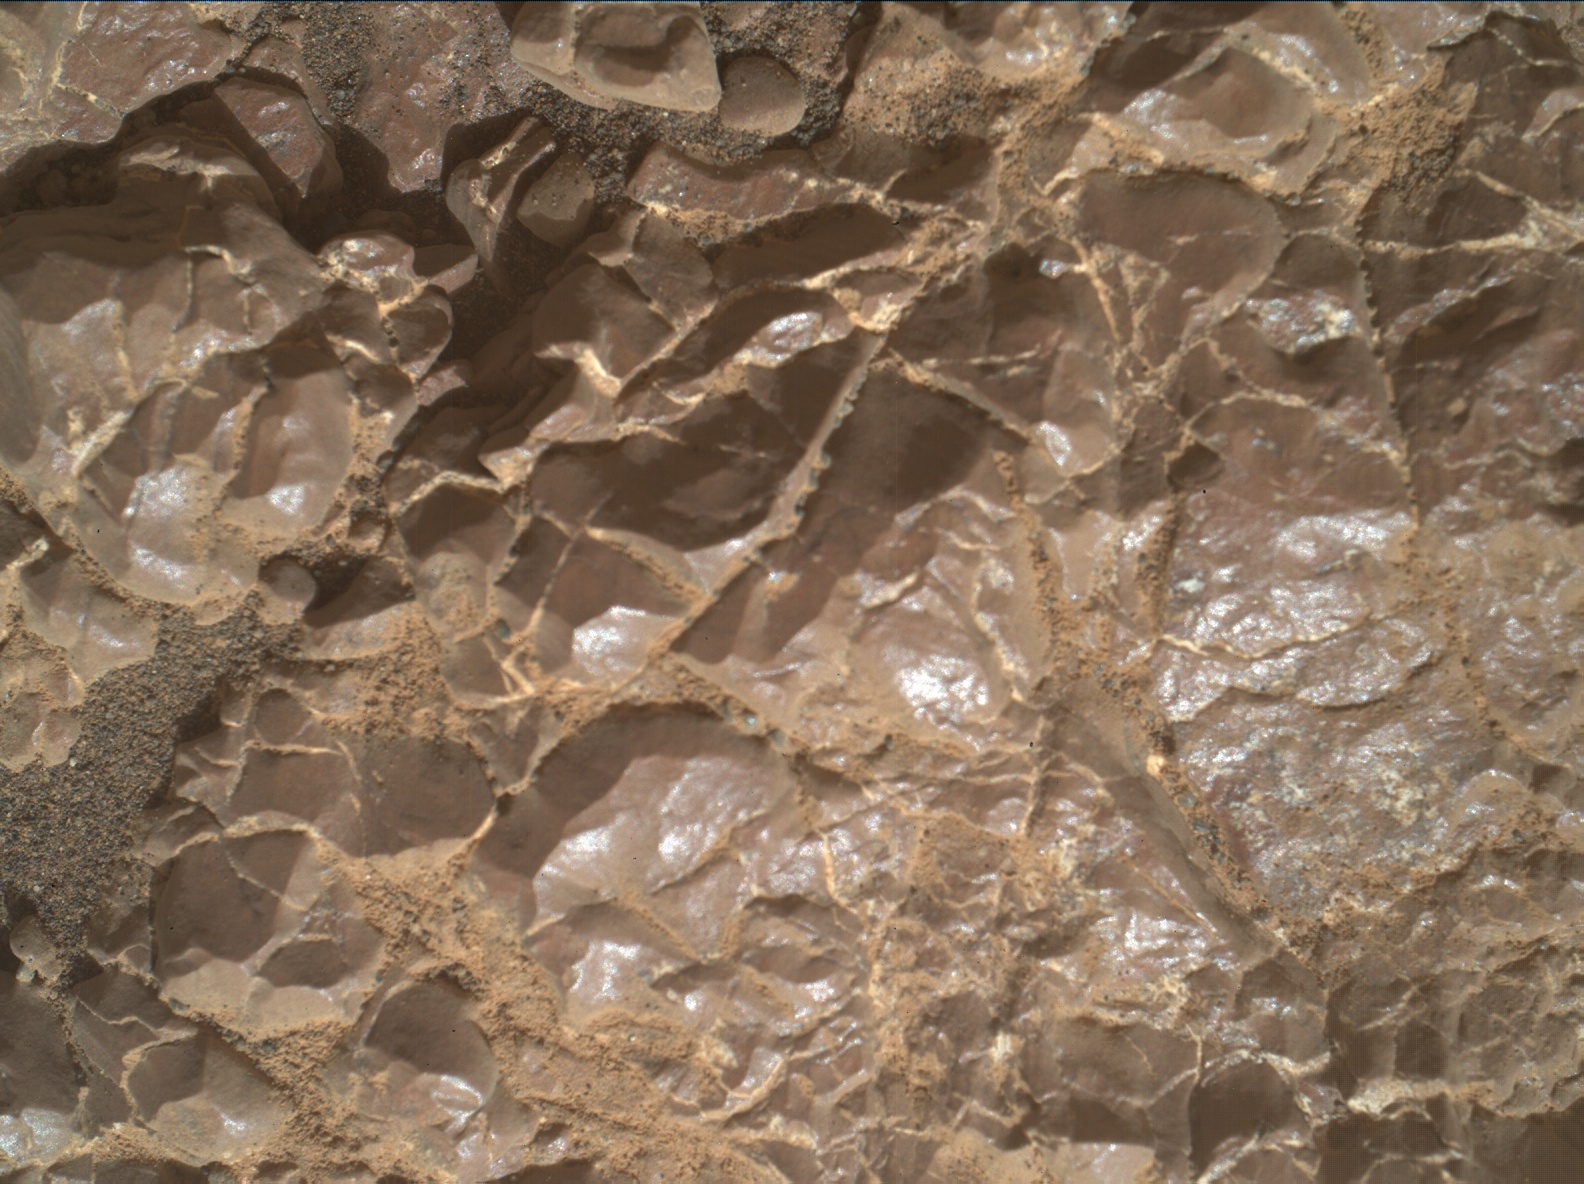 Nasa's Mars rover Curiosity acquired this image using its Mars Hand Lens Imager (MAHLI) on Sol 2258